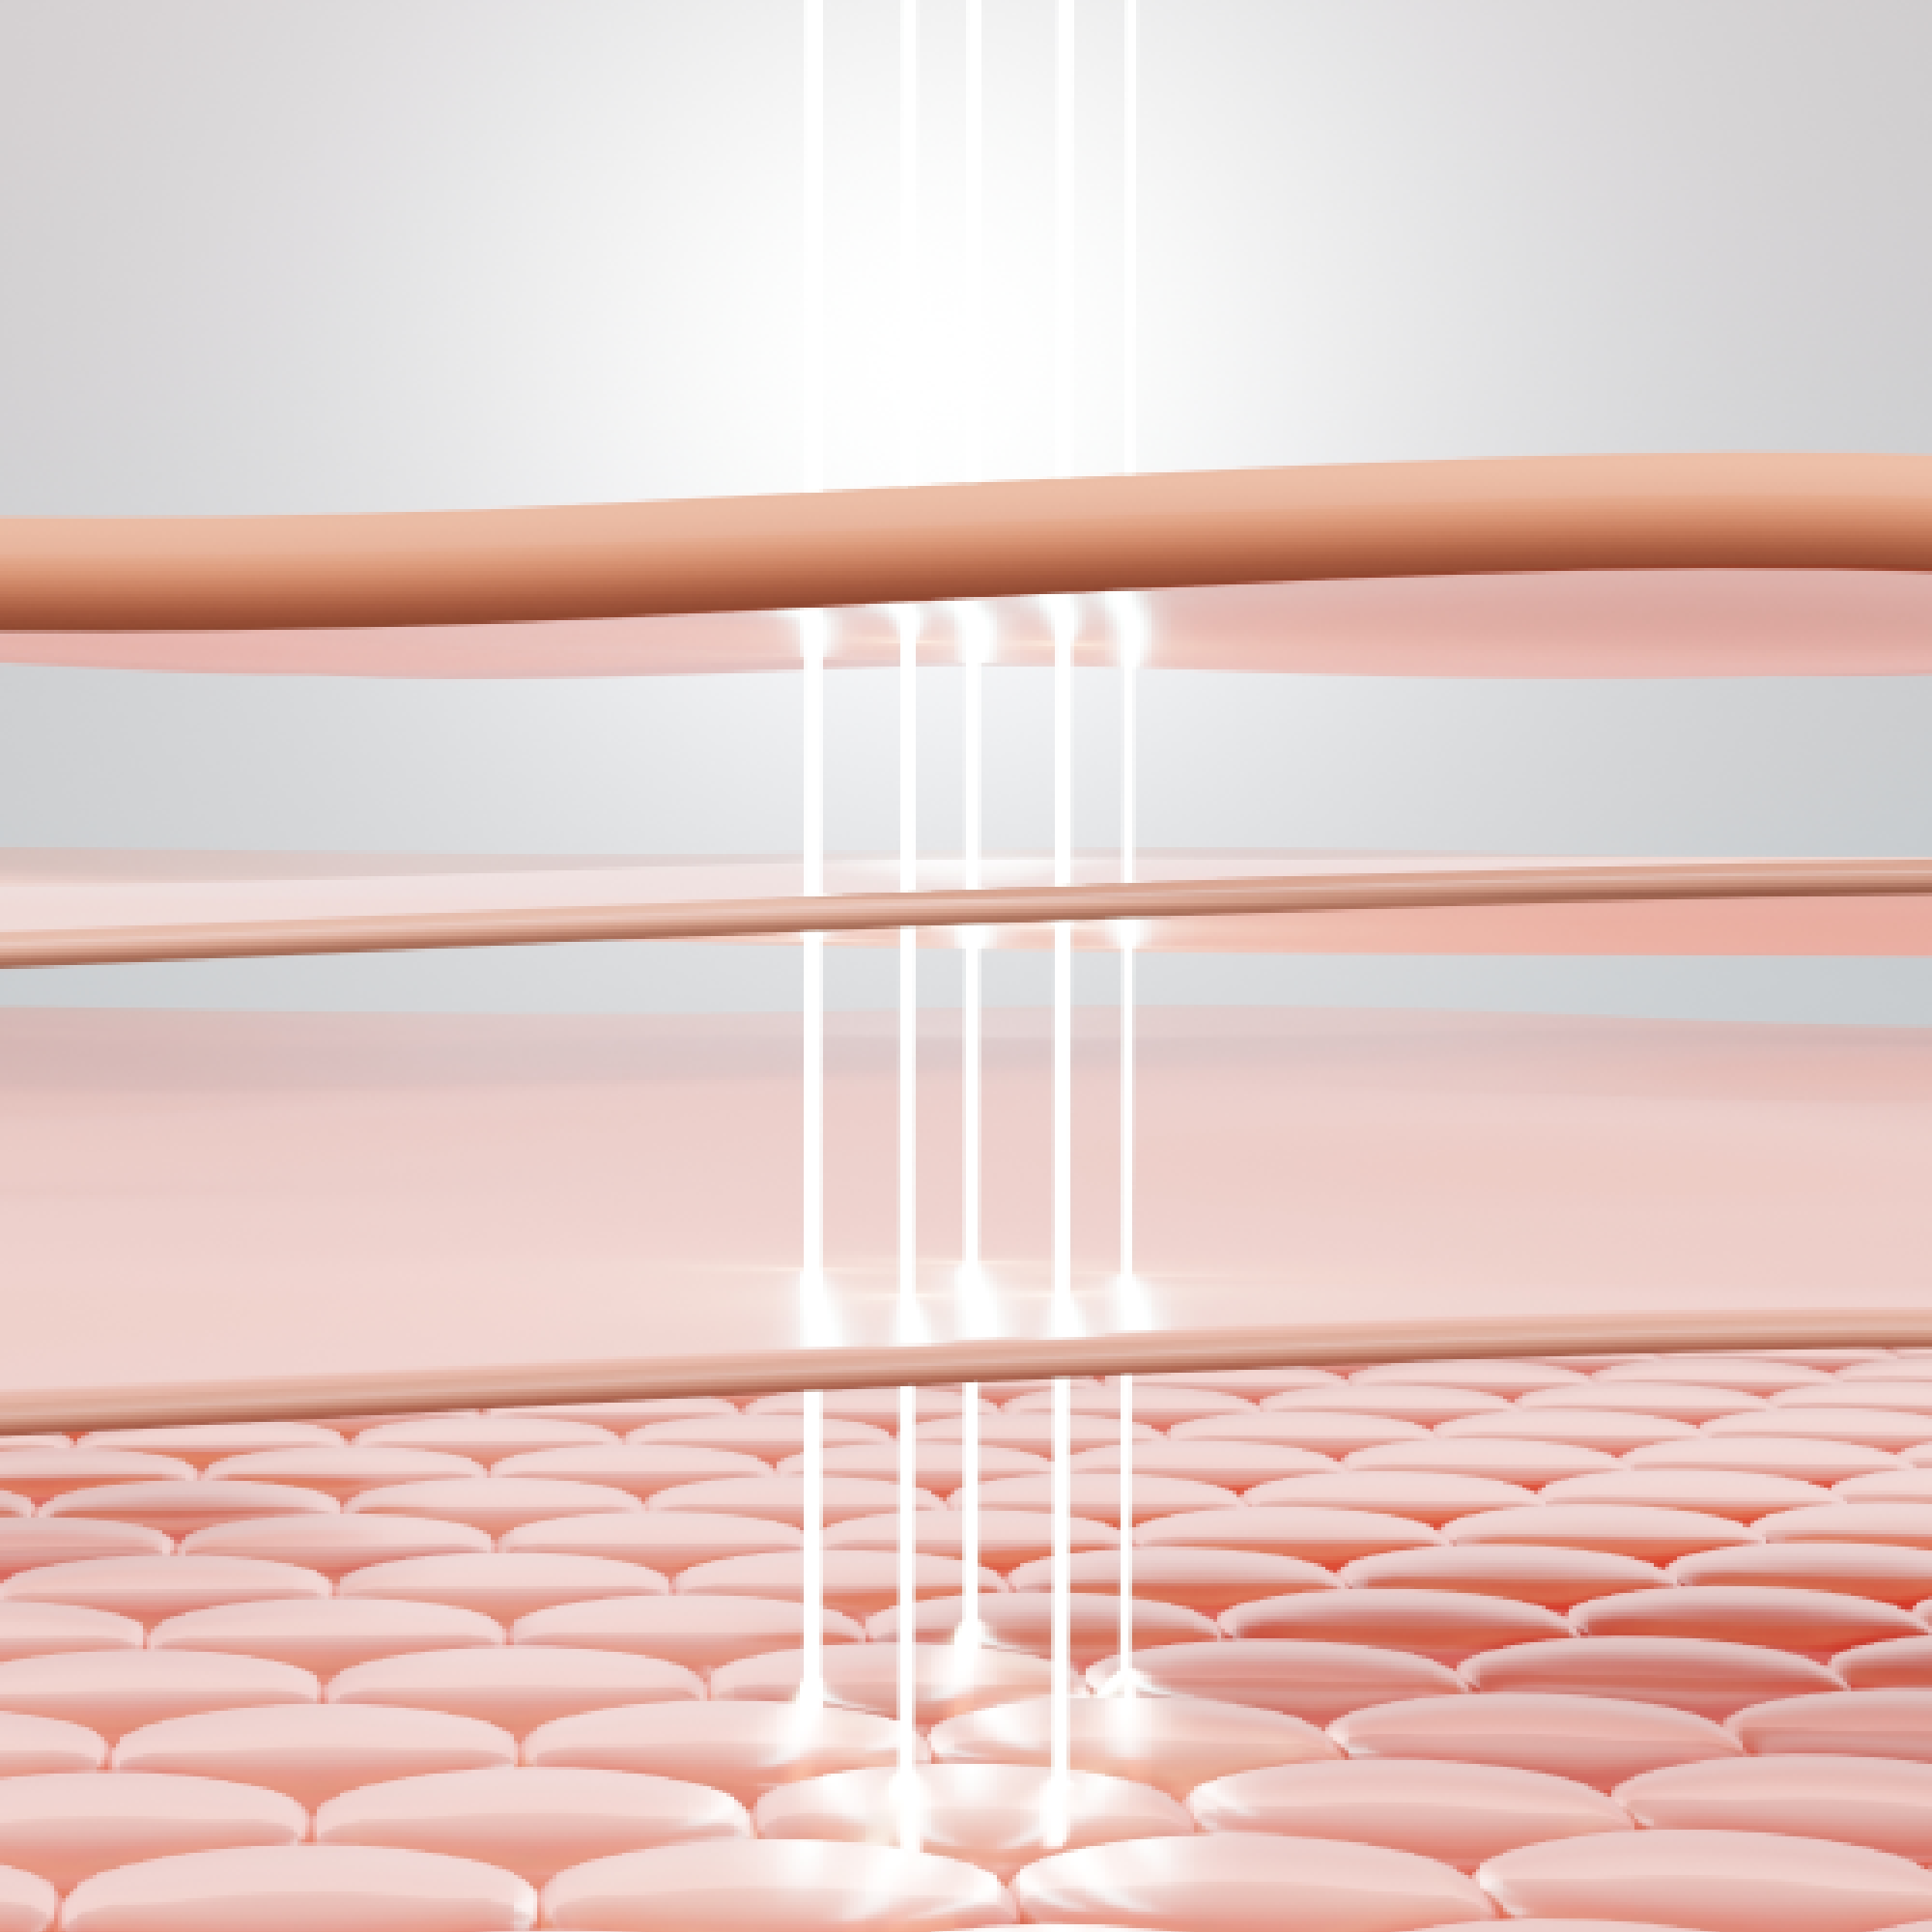 Illustration of advanced light therapy penetrating skin layers for rejuvenation and treatment.